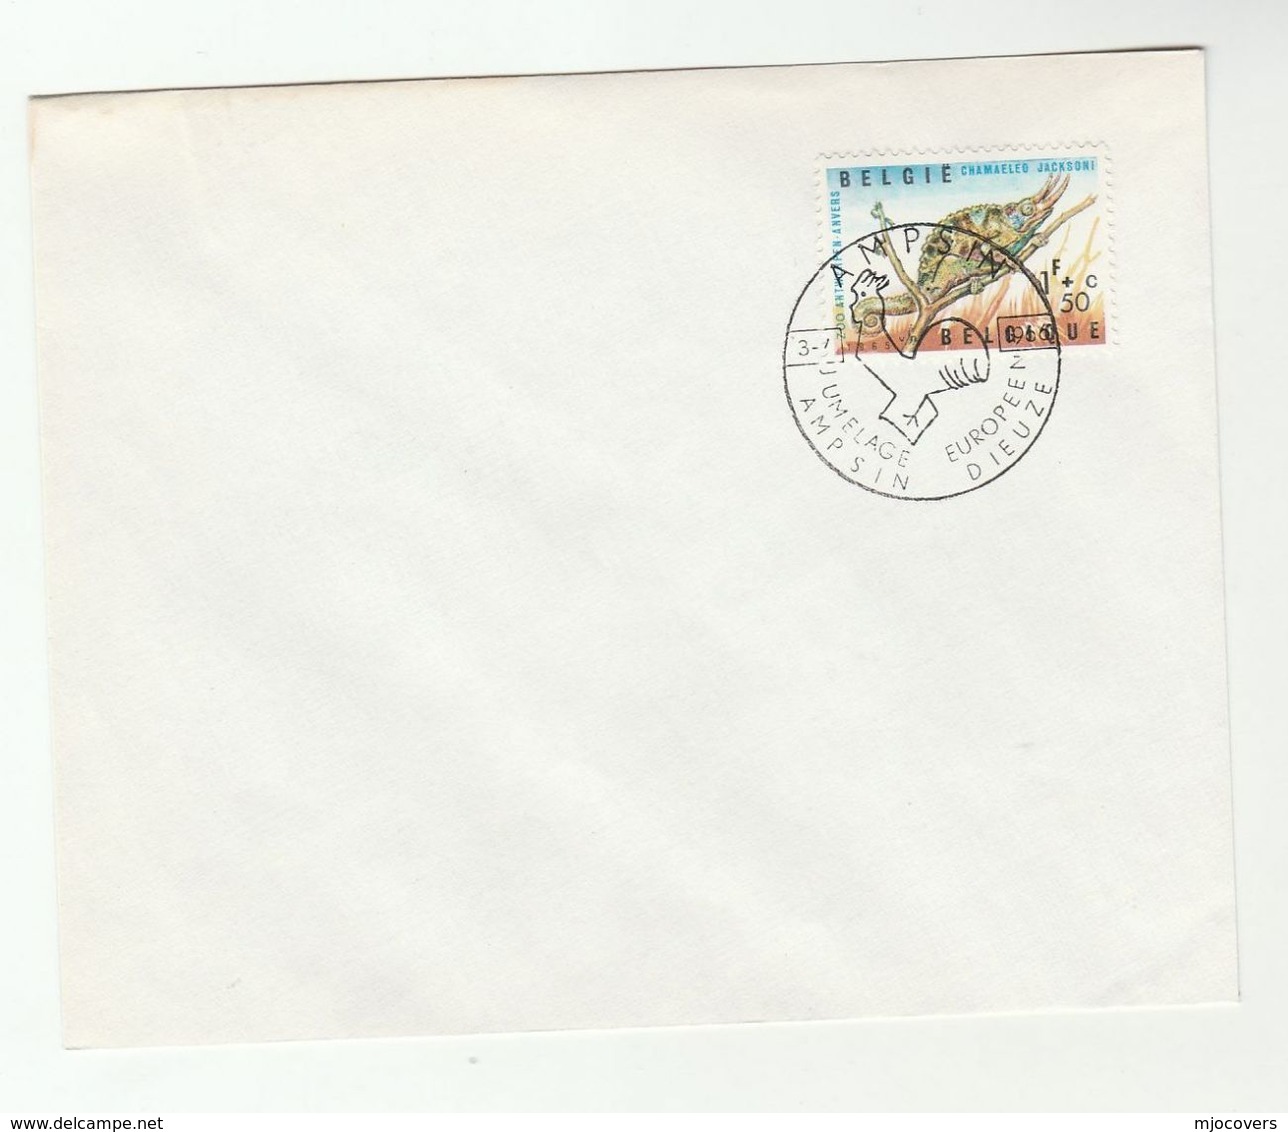 1966 BELGIUM EUROPEAN TWINNING EVENT COVER Ampsin Dieuze Stamps Chameleon - Covers & Documents